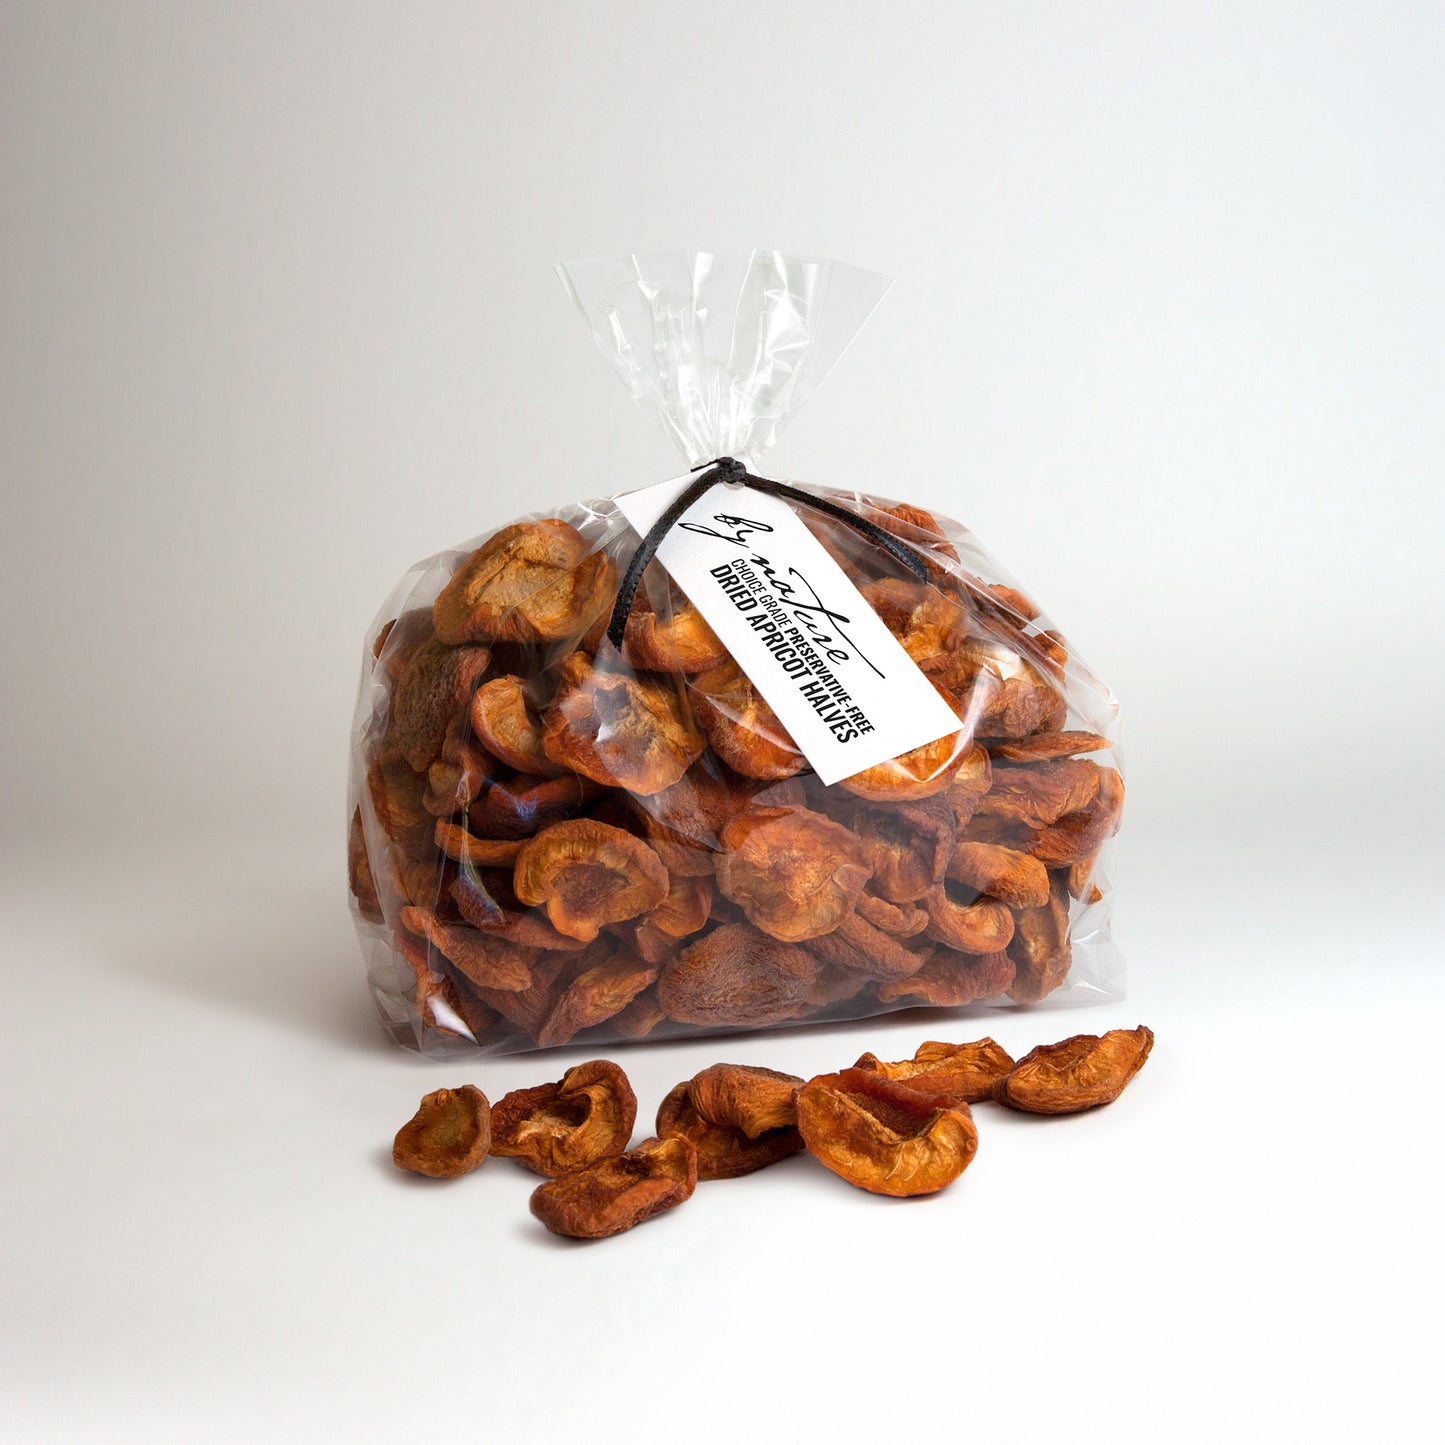 BY NATURE Dried Apricot Halves, 500g - preservative-free.